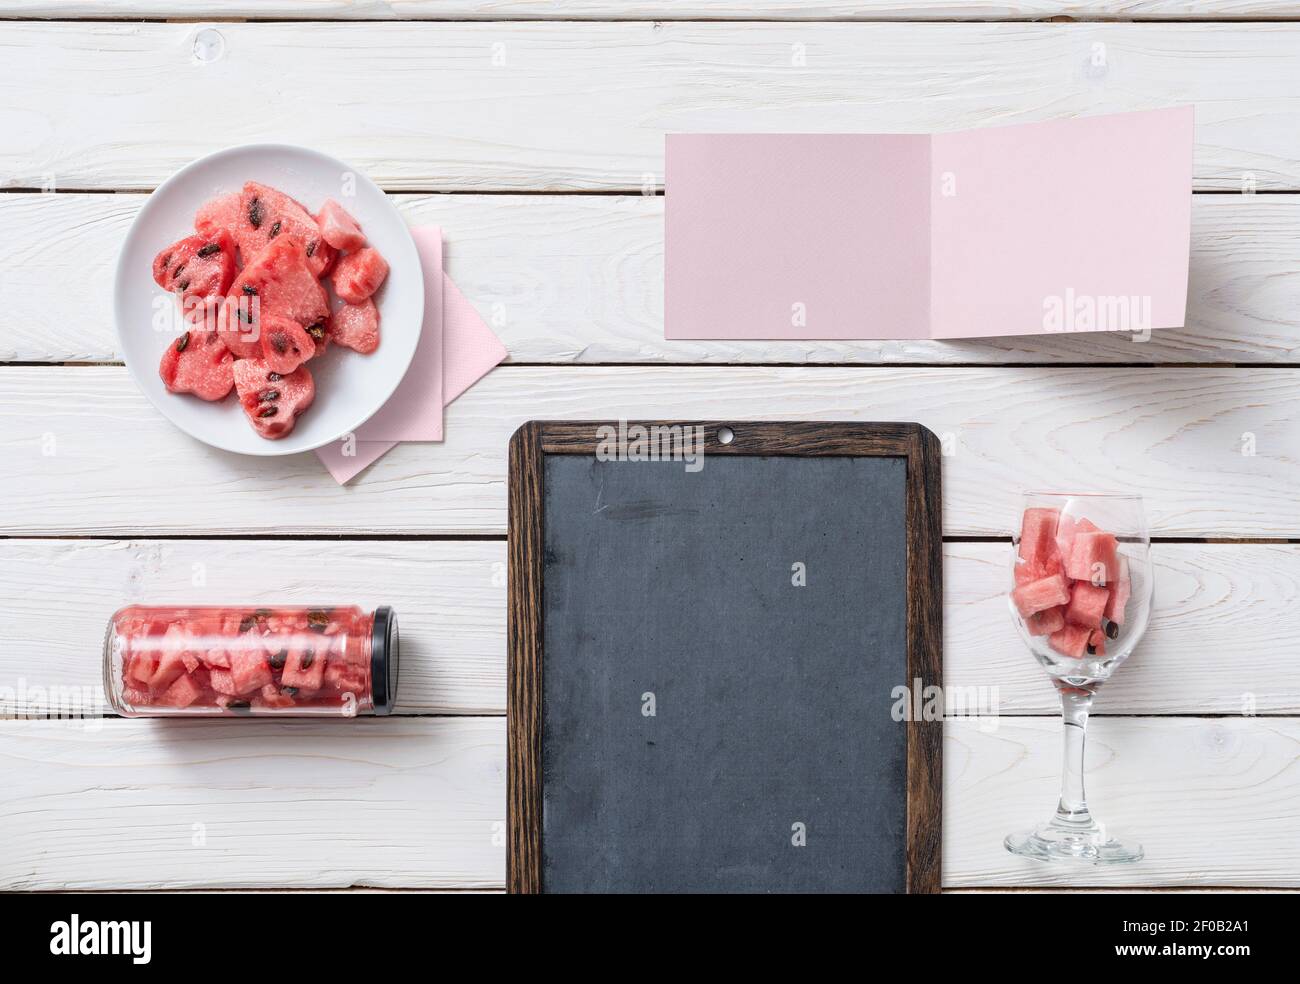 Chalkboard and tag on a desk with watermelon. Top view. Stock Photo